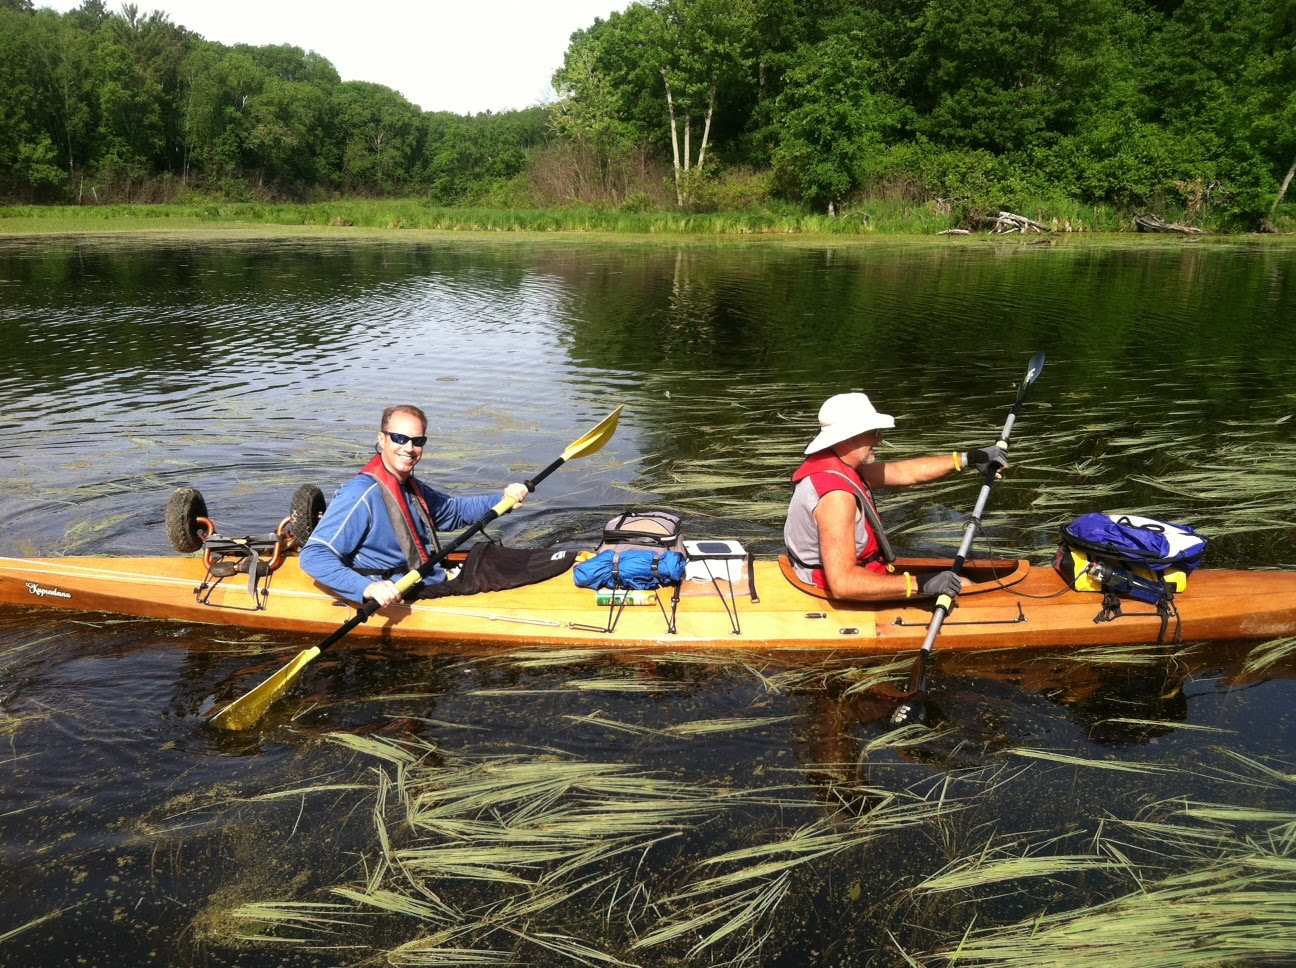 On Tues: Learn Building pygmy kayaks